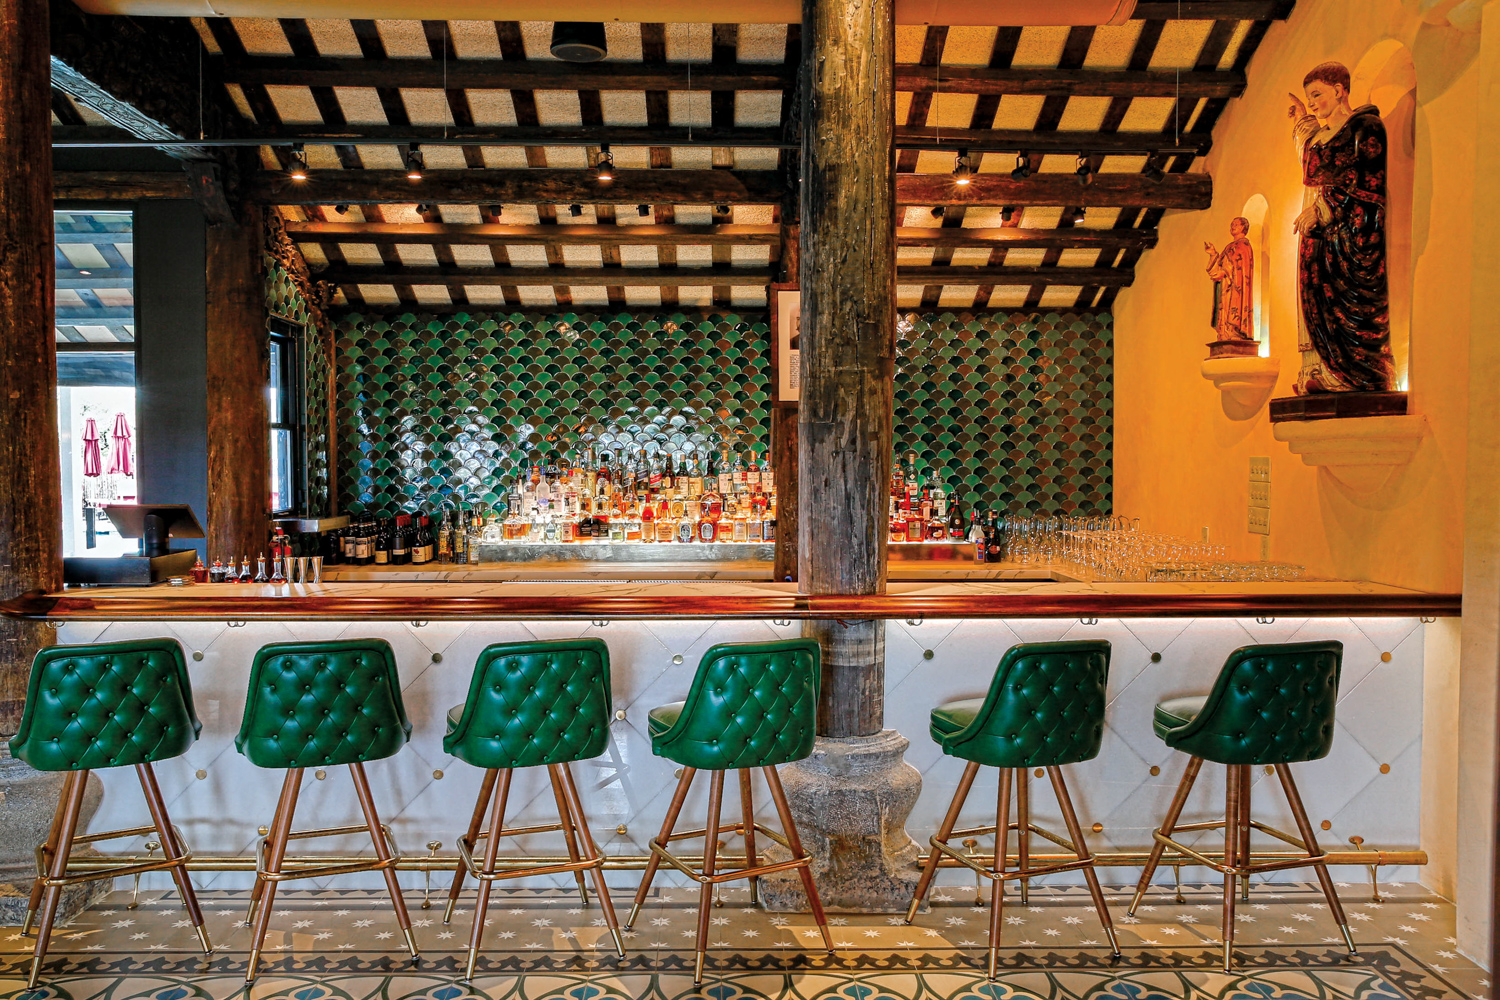 Marble-faced bar with brass buttons with emerald-green bar chairs at Tillie's in Camp Lucy